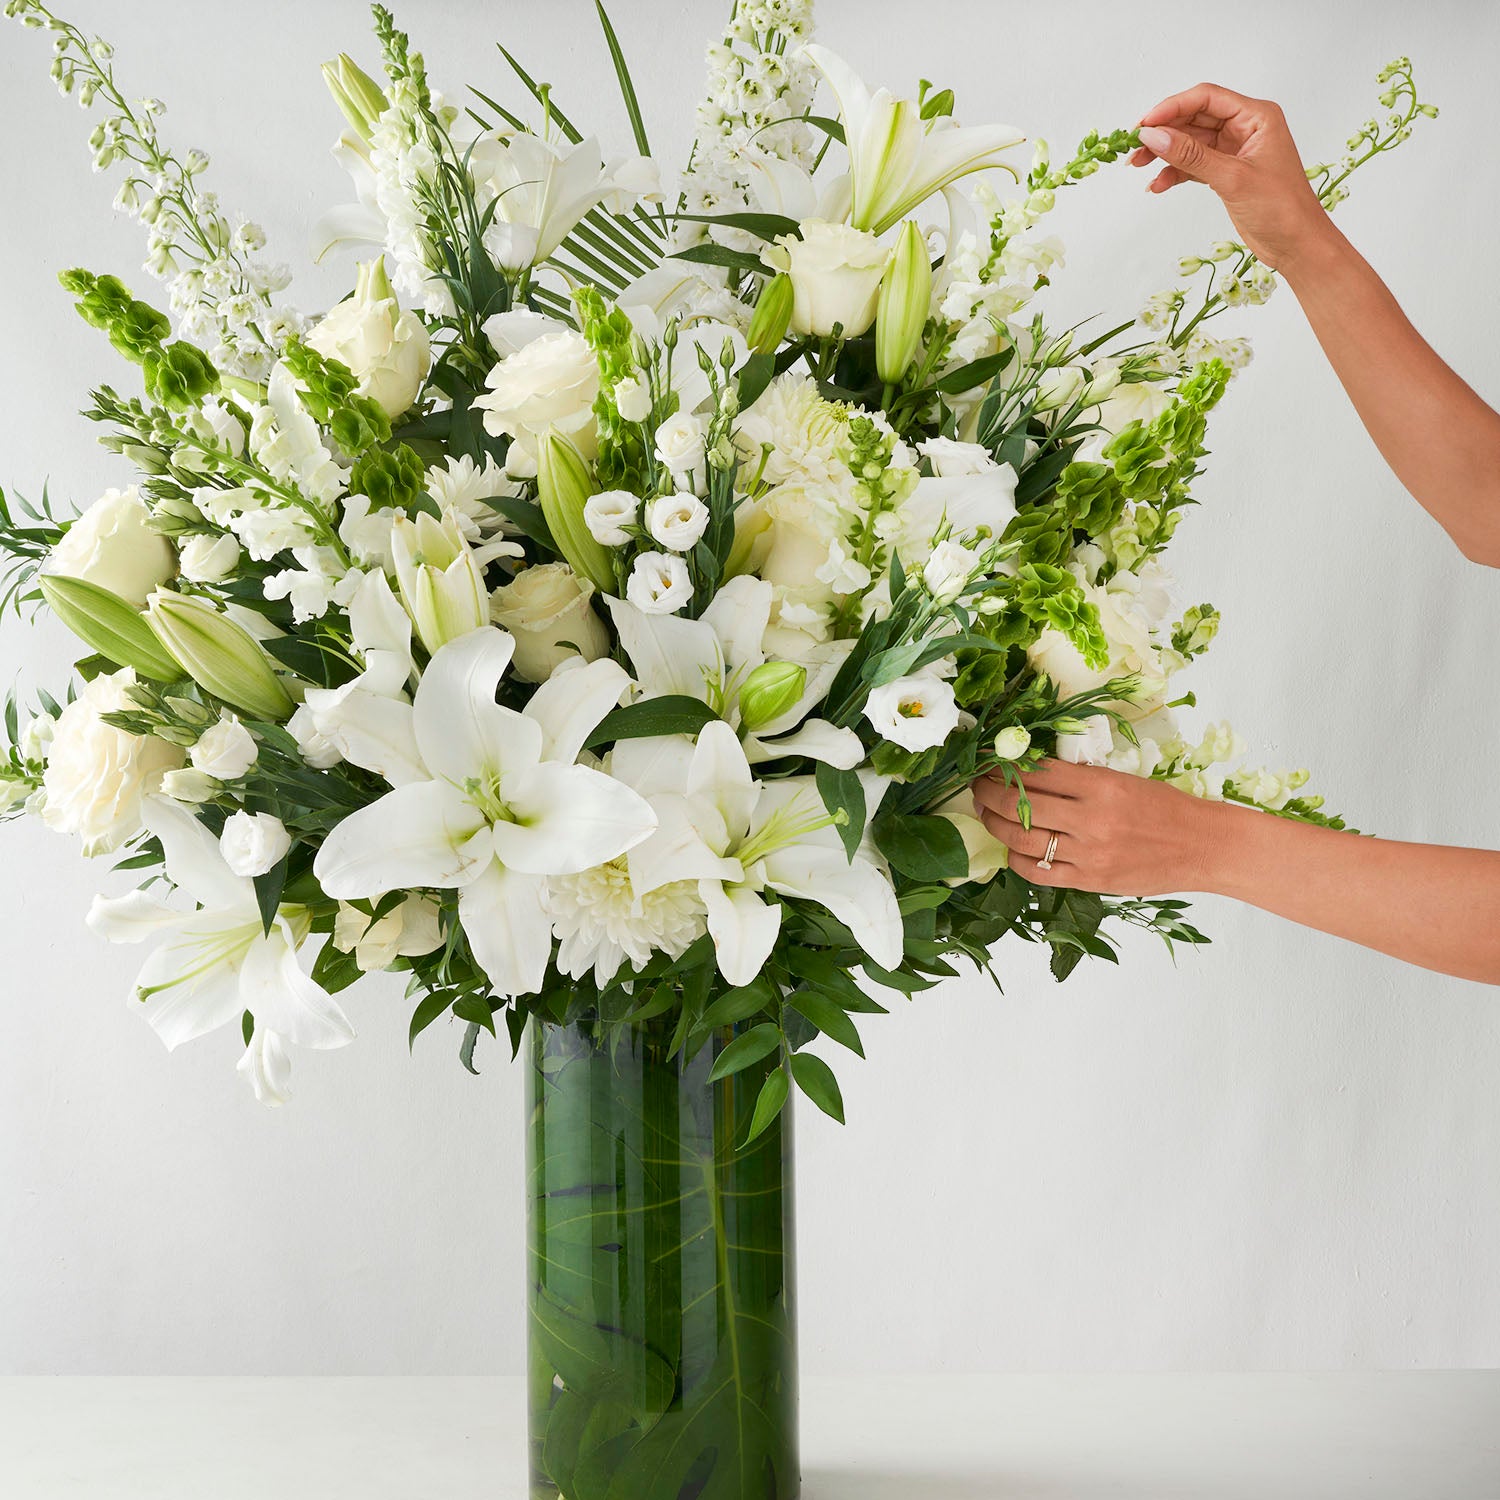 Large glass vase full of white flowers with two hands adjusting the flowers in the vase.